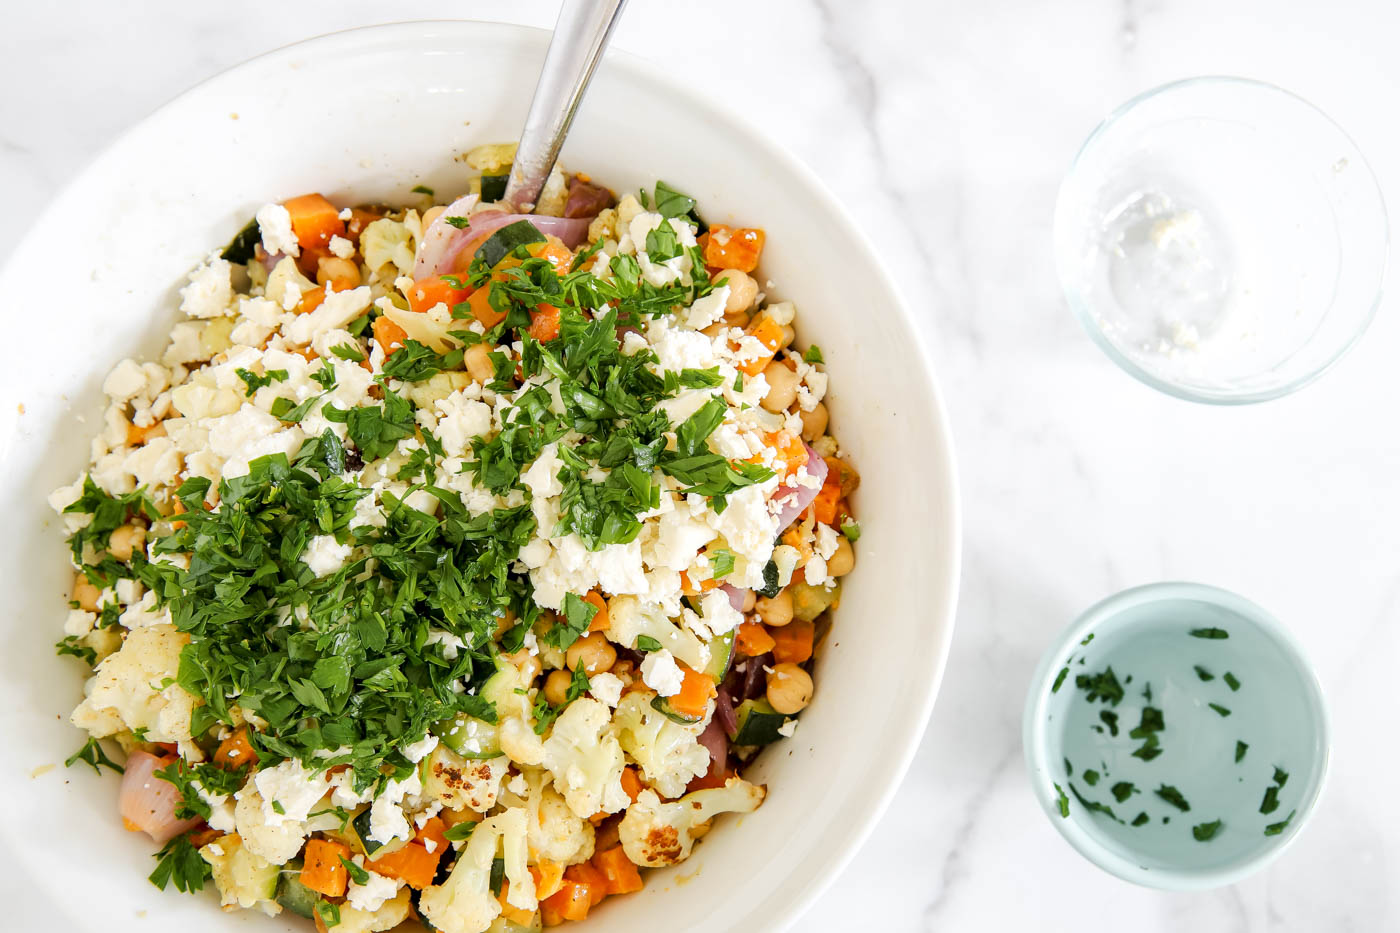 delicious root vegetable salad with chickpeas, feta, parsley and dressing